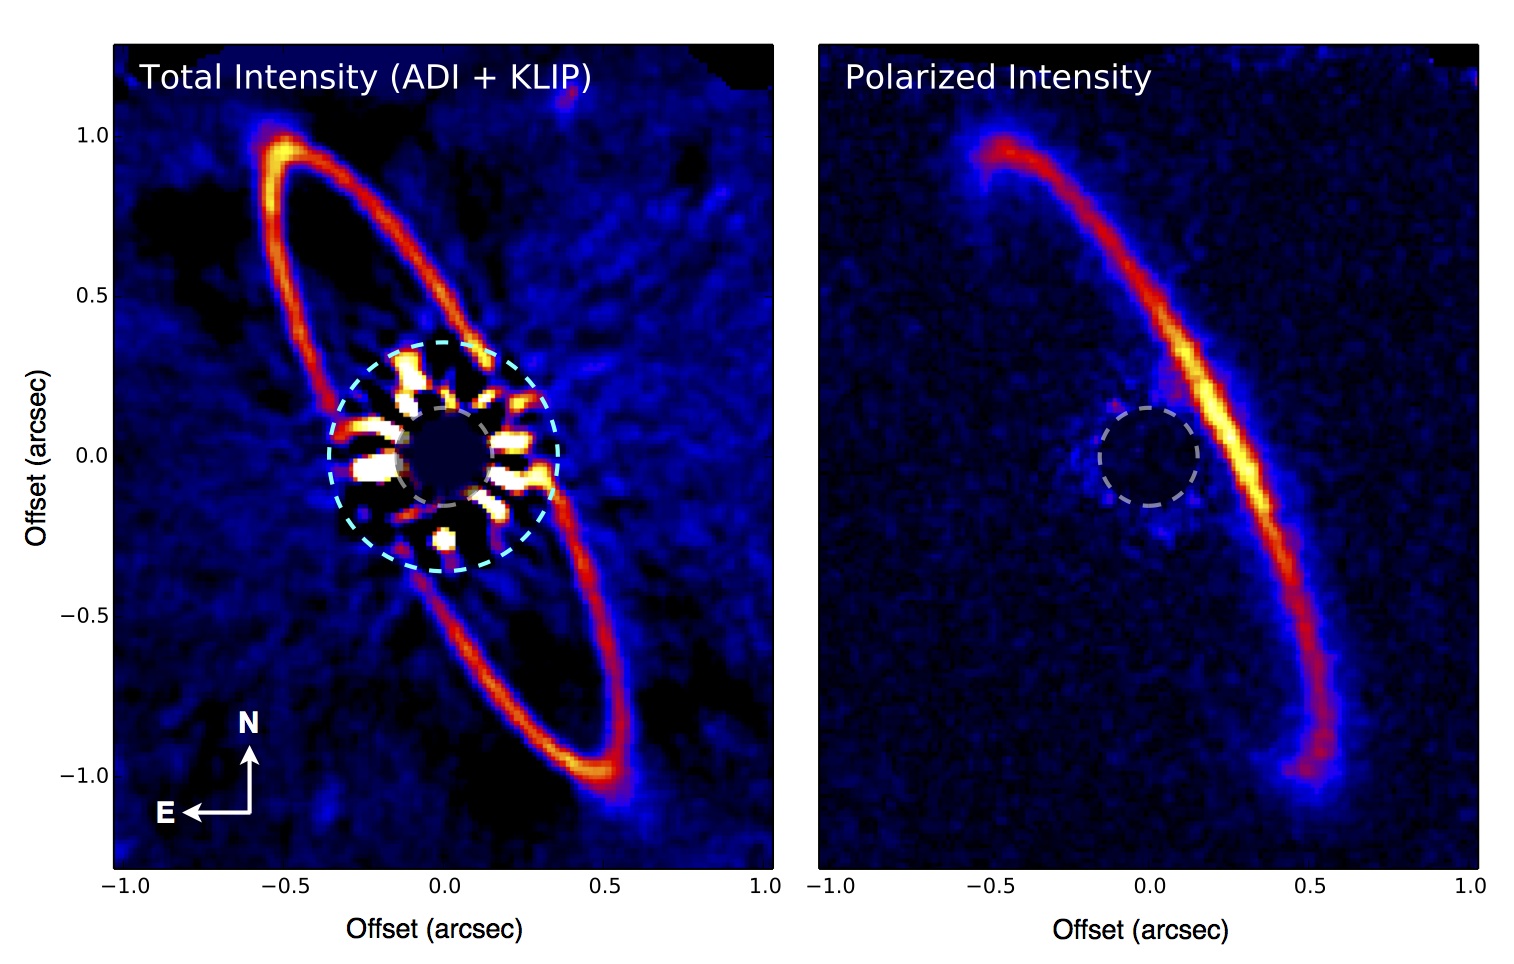 The circumstellar disk around the young star HR 4796A, as imaged by the Gemini Planet Imager, which is mounted on the 8.2-m Gemini South telescope in Chile. These images reveal a complex pattern of variations in brightness and polarization around the HR 4796A disk. The western side (tilted closer to the Earth) appears brighter in polarized light, while in total intensity the eastern side appears slightly brighter, particularly just to the east of the widest apparent separation points of the disk. Image Credit: Marshall Perrin (Space Telescope Science Institute), Gaspard Duchene (UC Berkeley), Max Millar-Blanchaer (University of Toronto), and the GPI Team